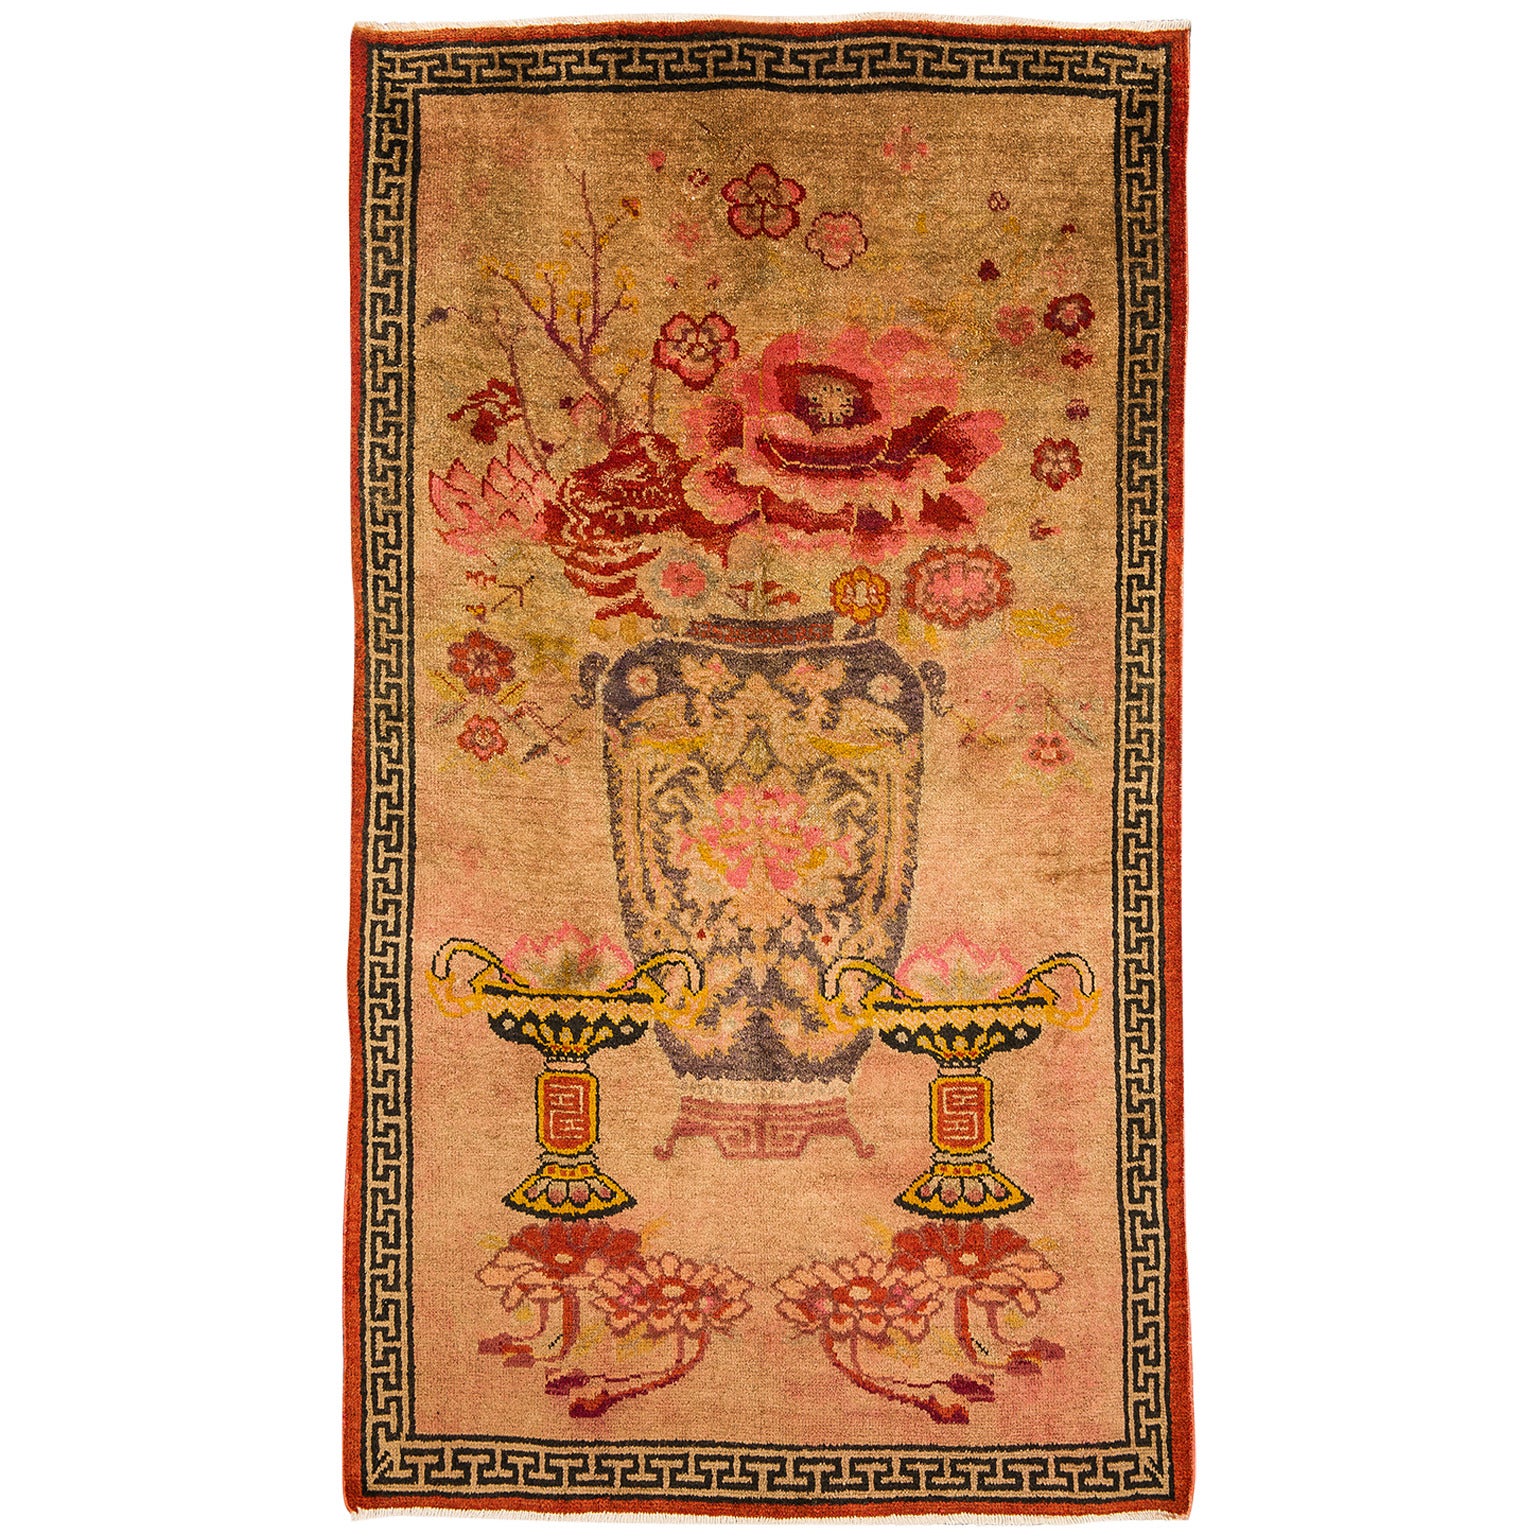 Rare Sinkiang Chinese Old Carpet, "Big Vase", also Wall Hanging For Sale